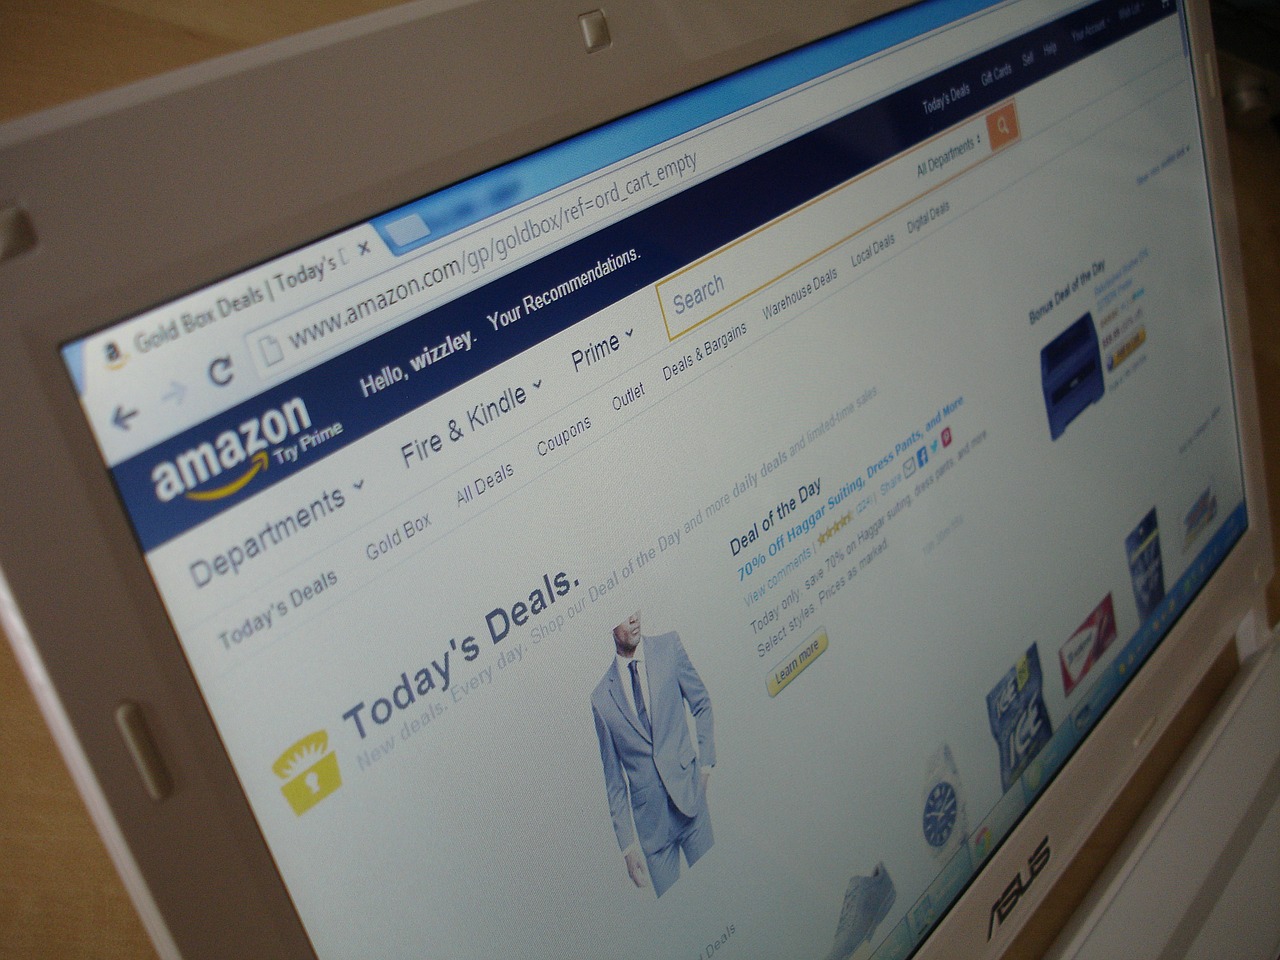 Competition Commission of India: Amazon engaging in anti-competitive behavior